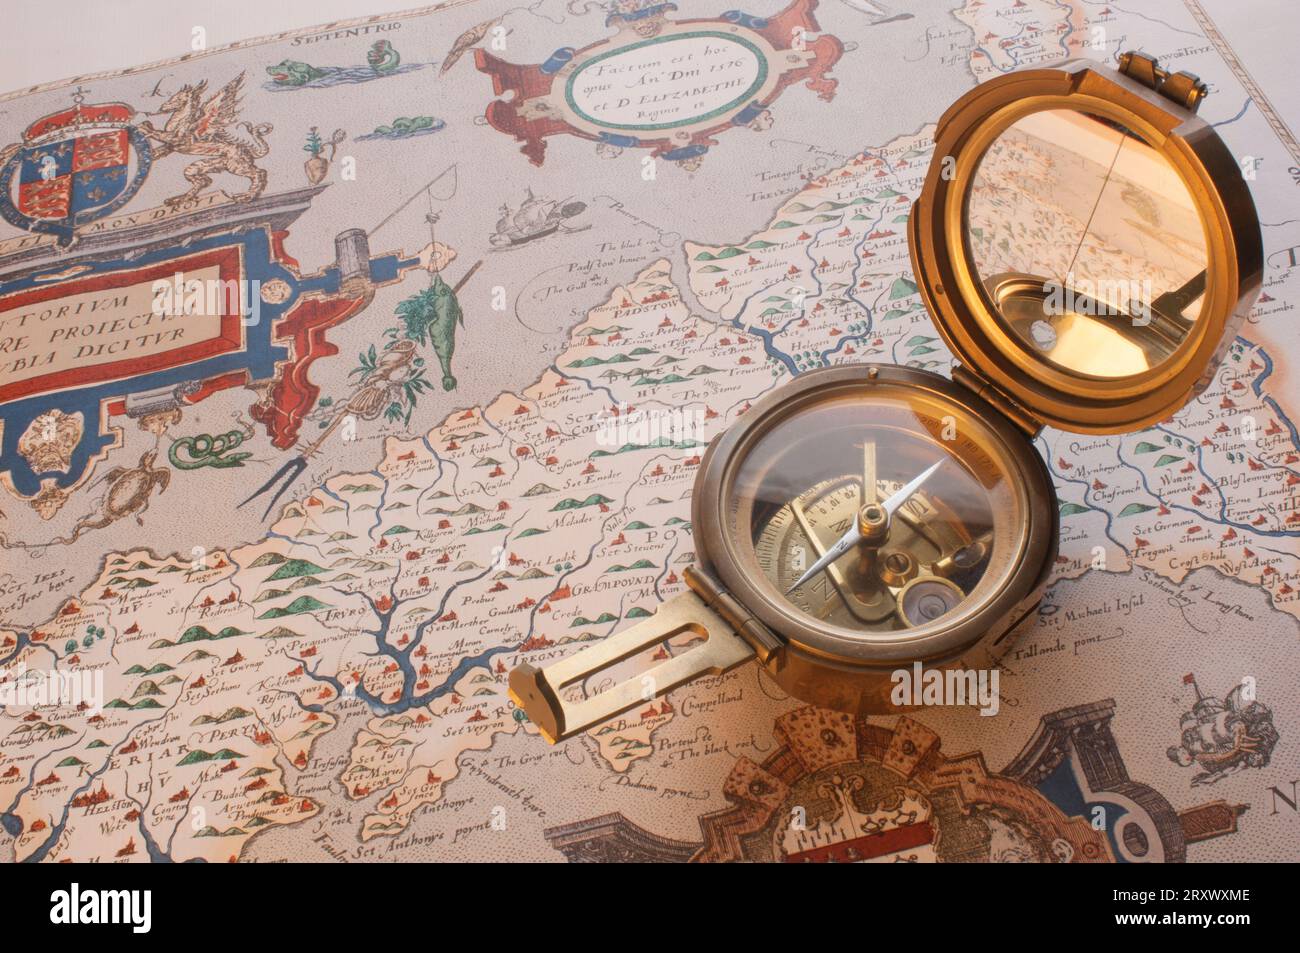 An old brass compass lying on an ancient map of Cornwall - John Gollop Stock Photo